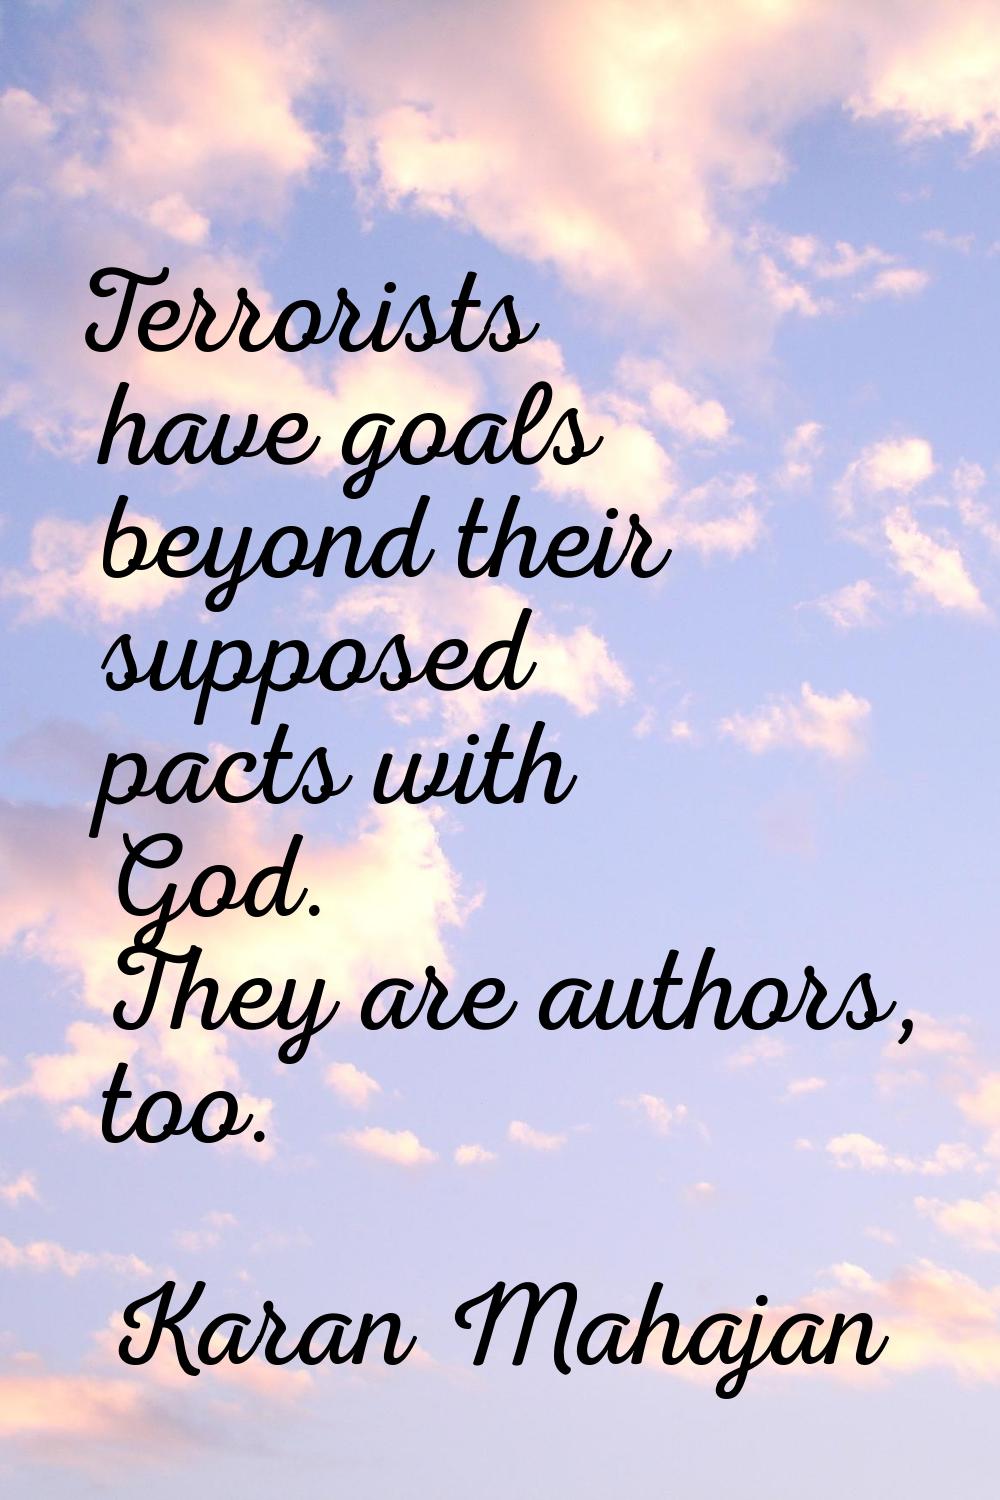 Terrorists have goals beyond their supposed pacts with God. They are authors, too.